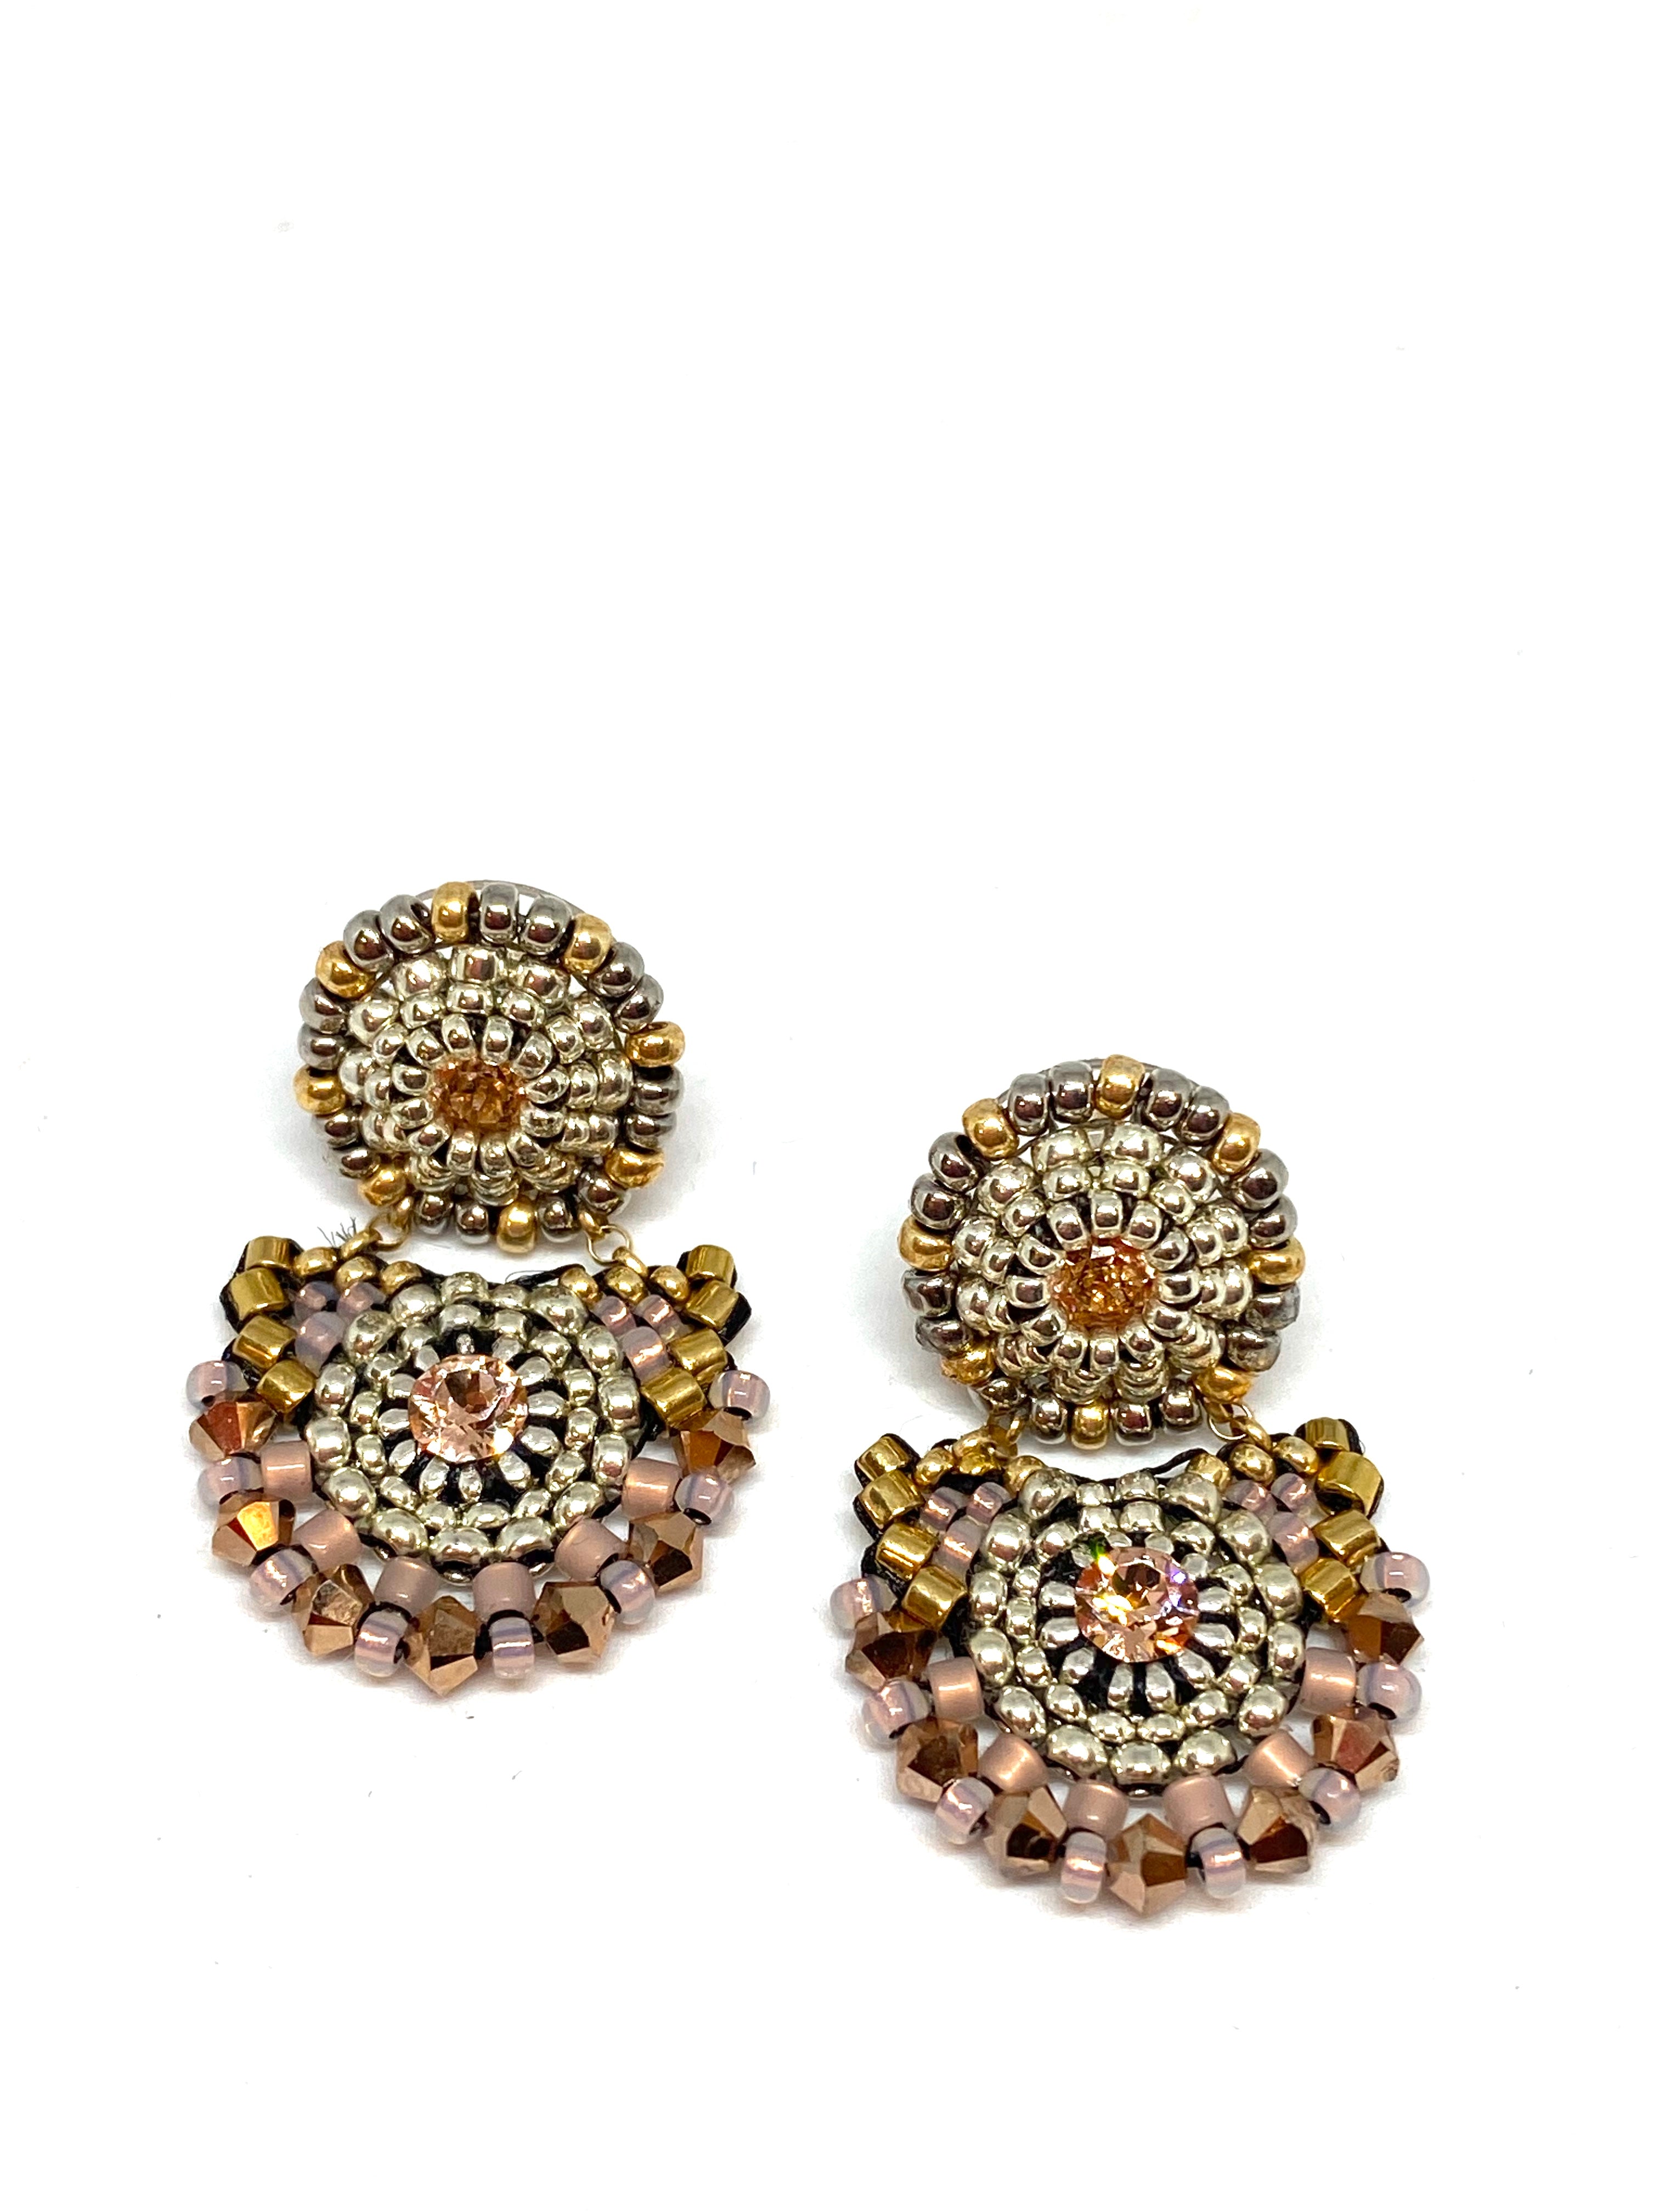 Miguel Ases Swarovski crystal and Miyuki Bead Earrings, found at Patricia In Southern Pines, NC